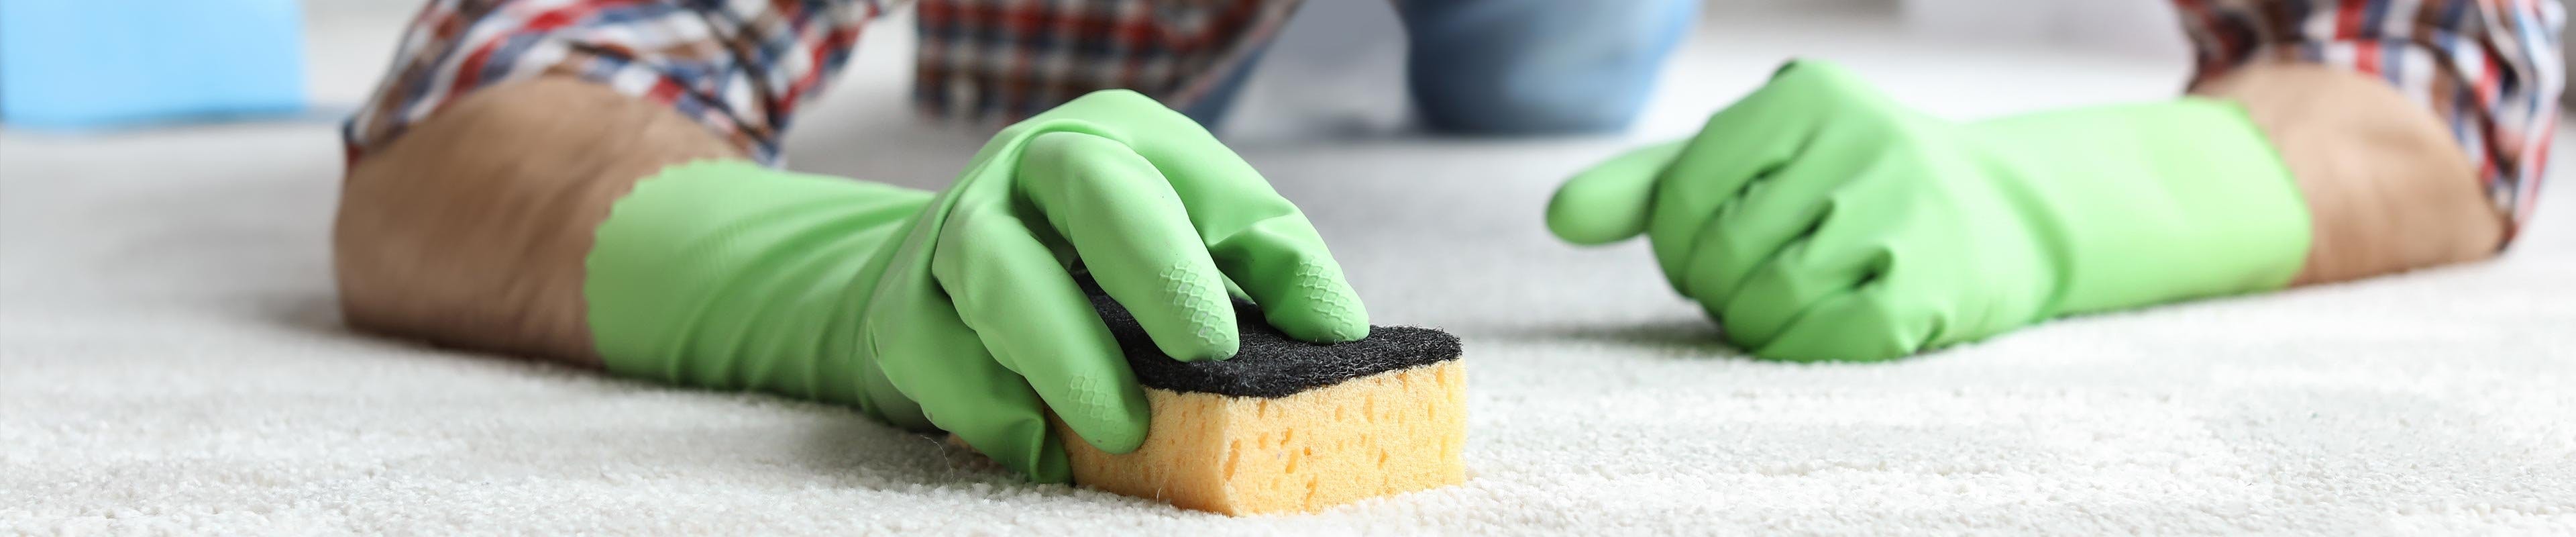 A white man wearing green rubber gloves cleaning his carpet with a sponge on his hands and knees.